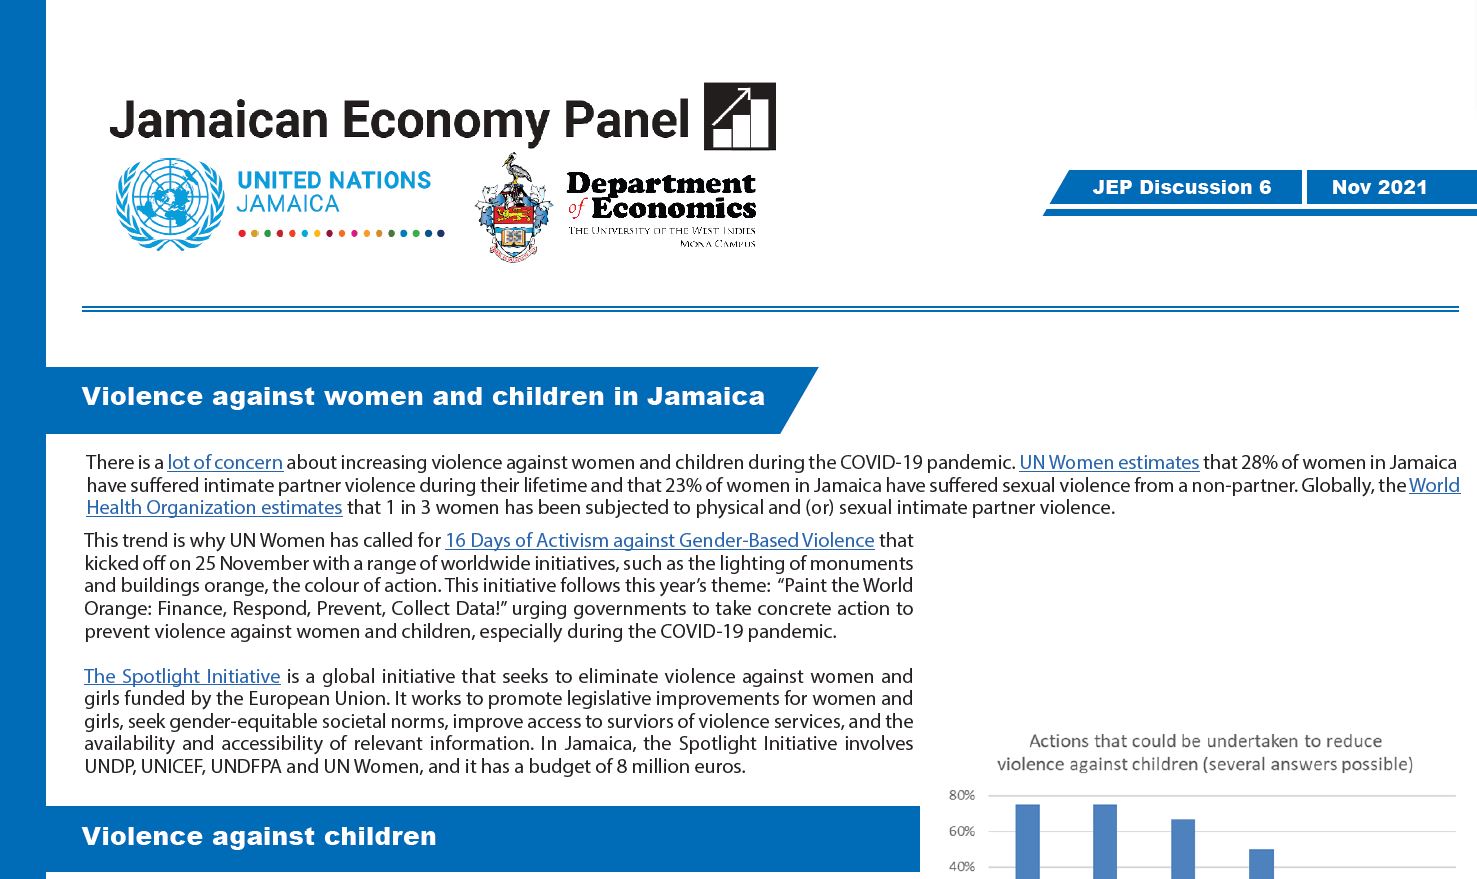 Jamaica Economy Panel Discussion Six on Violence Against Women and Children | November 2021